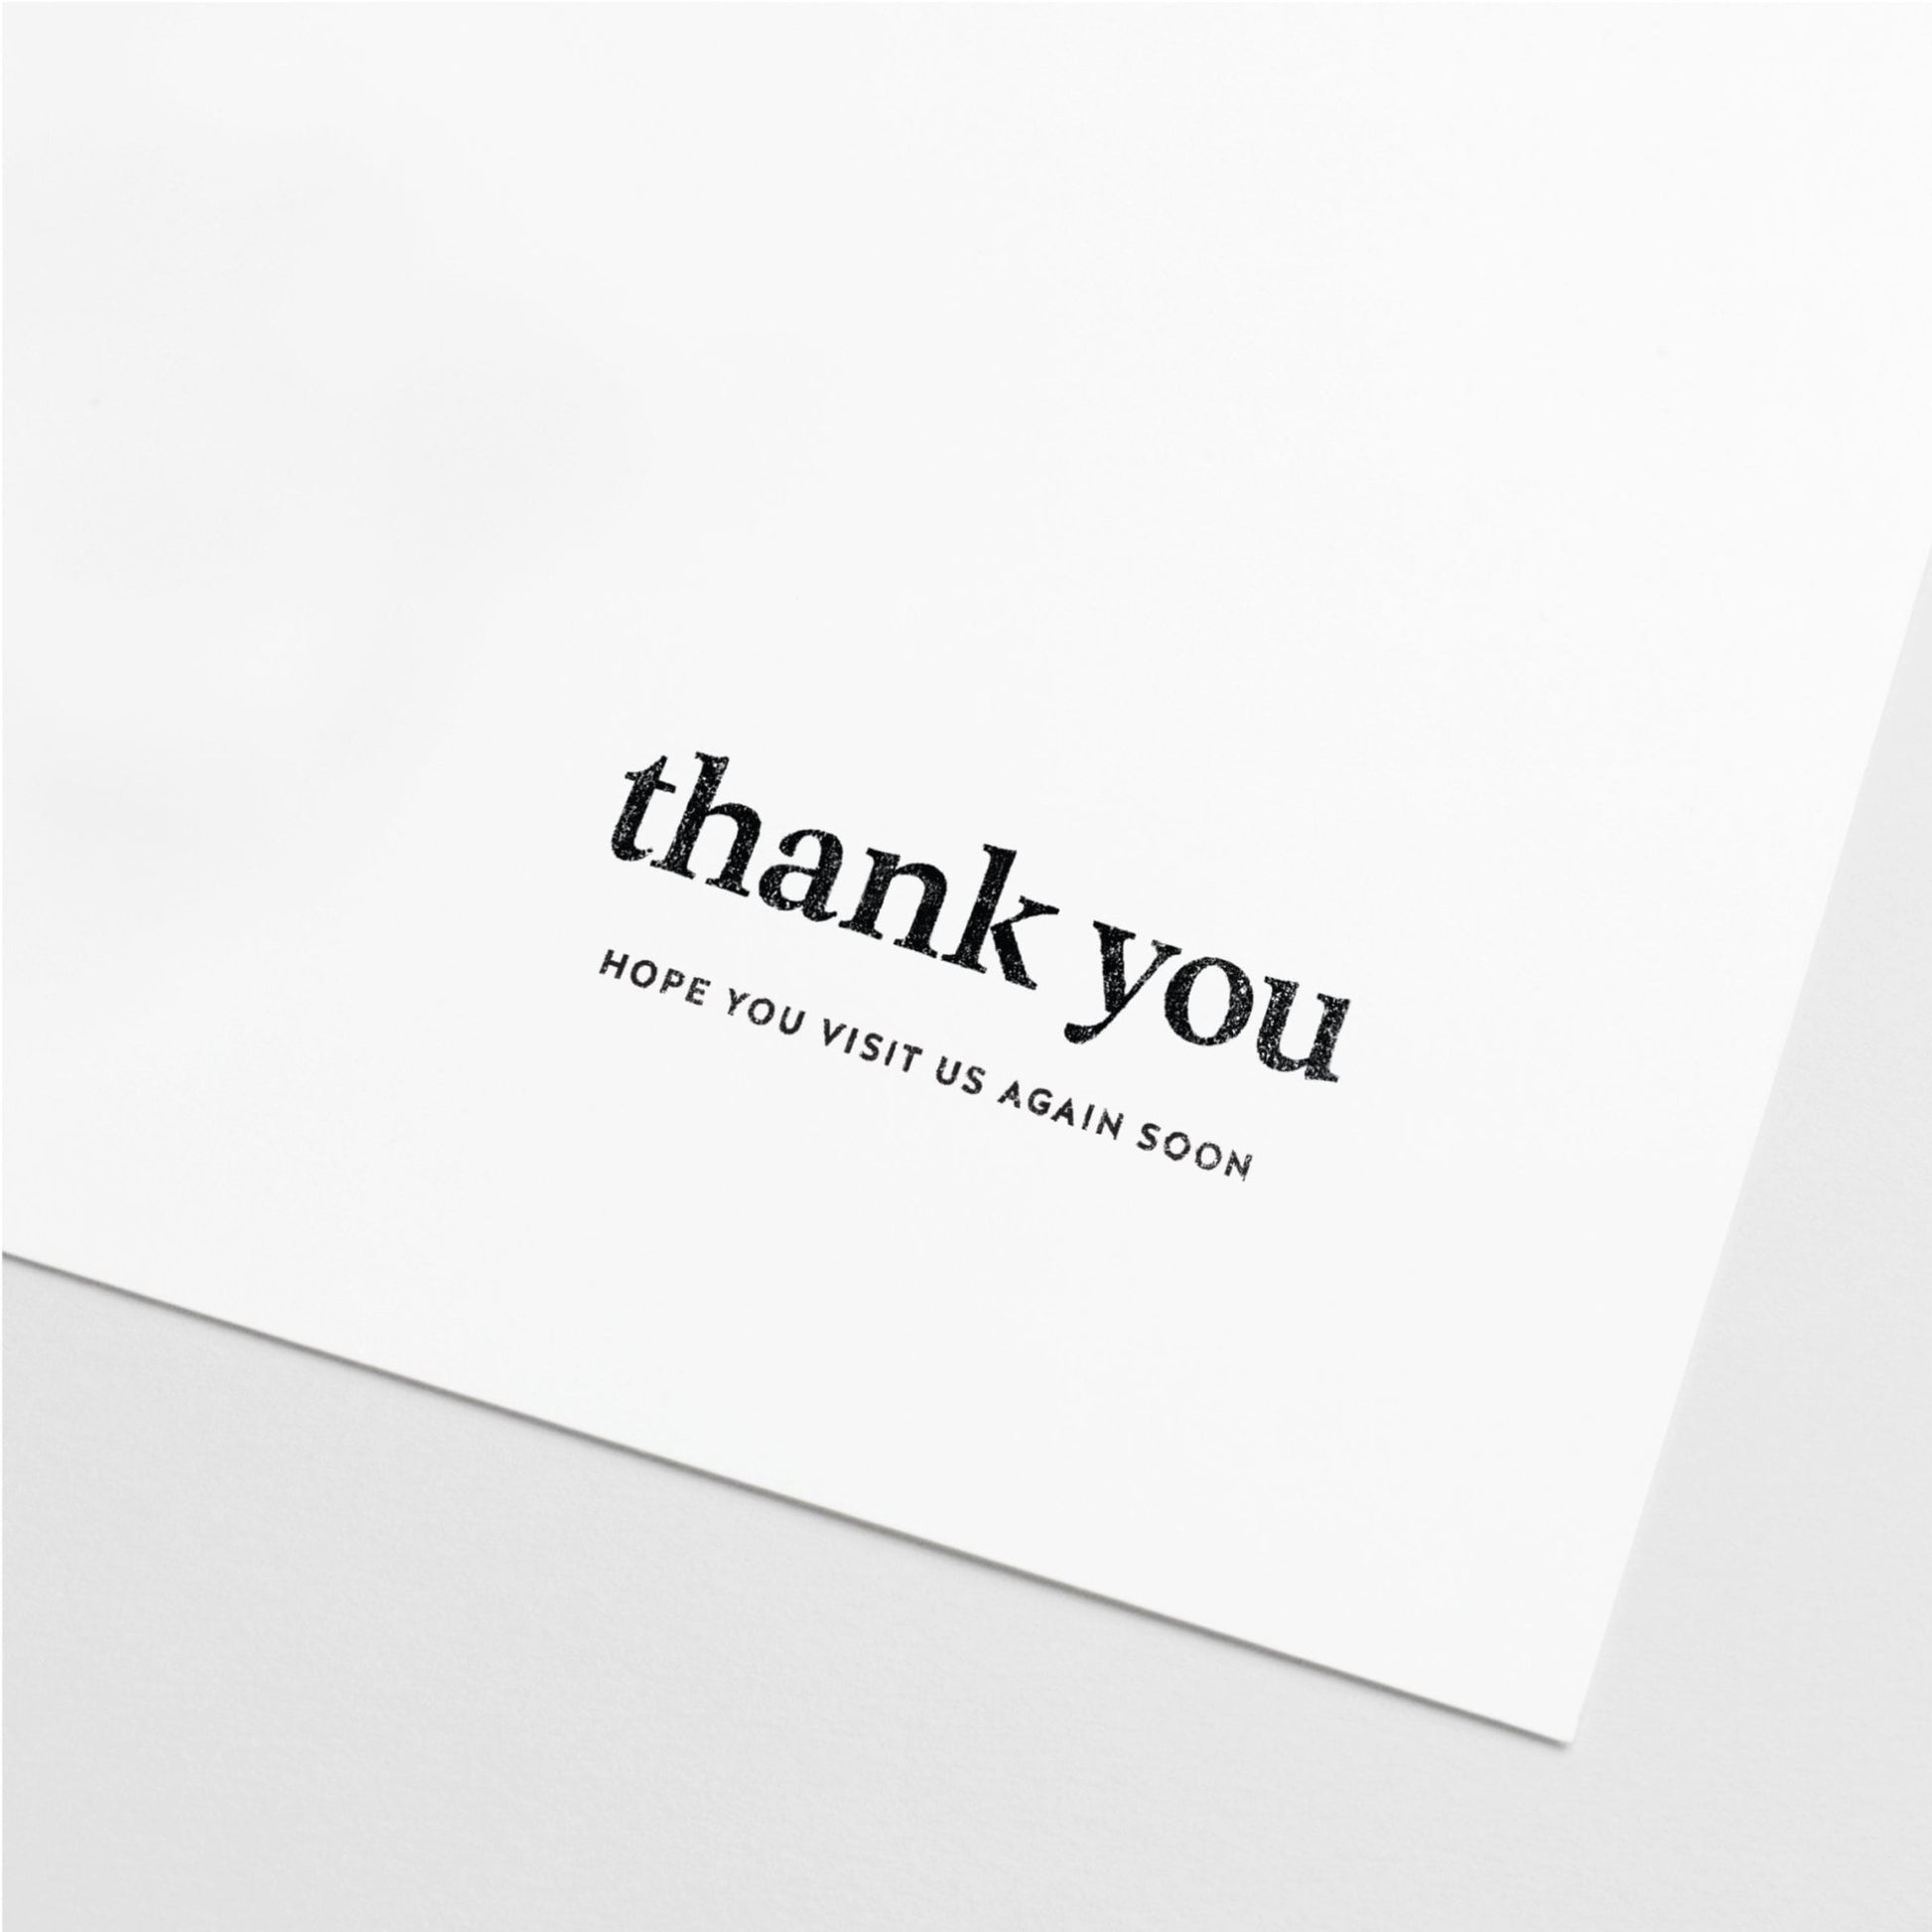 Thank You Stamp, Business Stamper, Small at The Design Craft